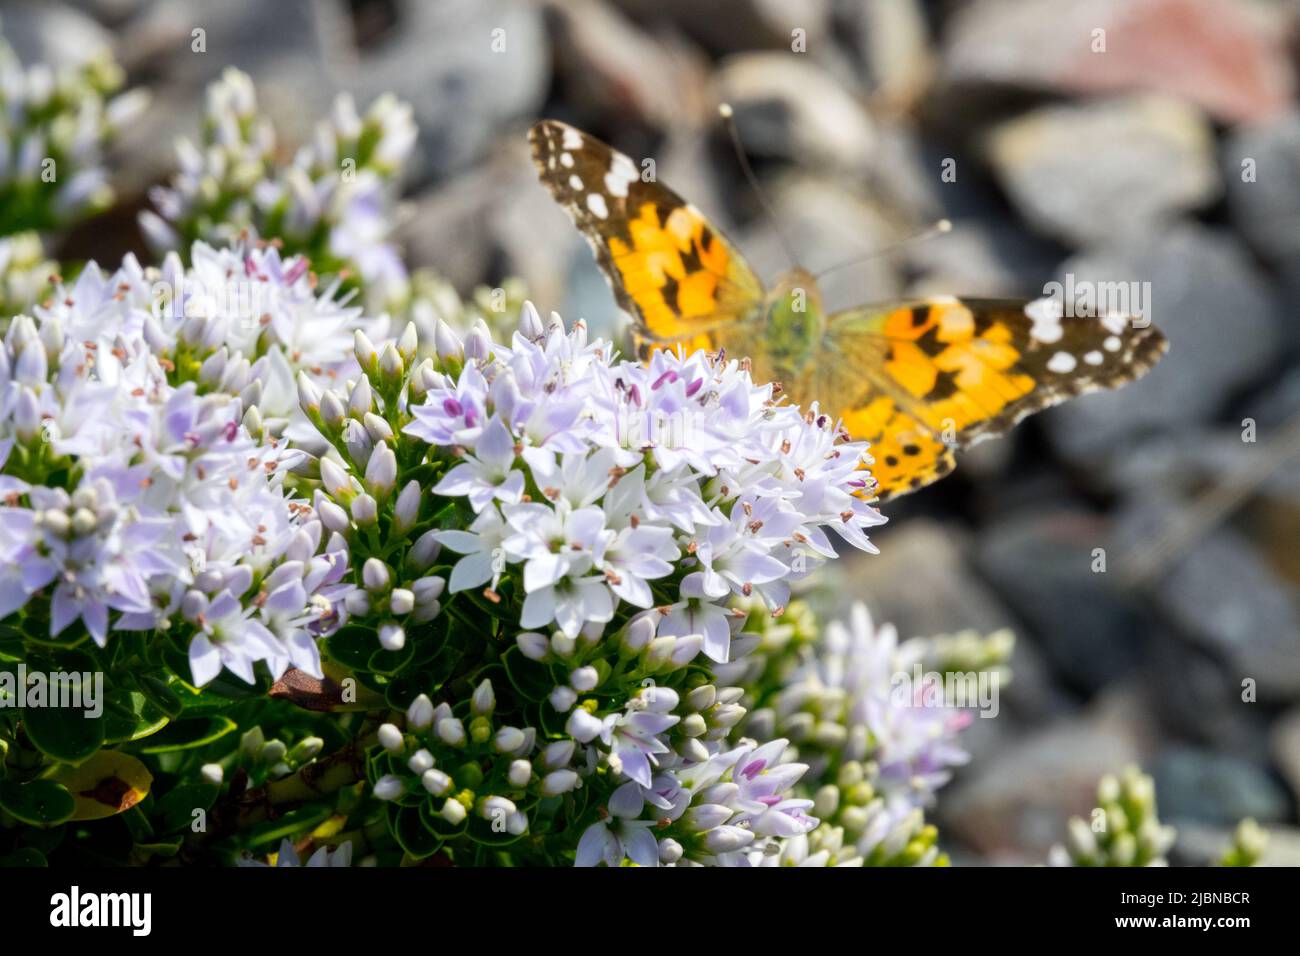 Butterfly on Hebe, Hebe vernicosa 'Varnished Koromiko', Dwarf, Shrub, Blooming, Plant, Flowers Stock Photo